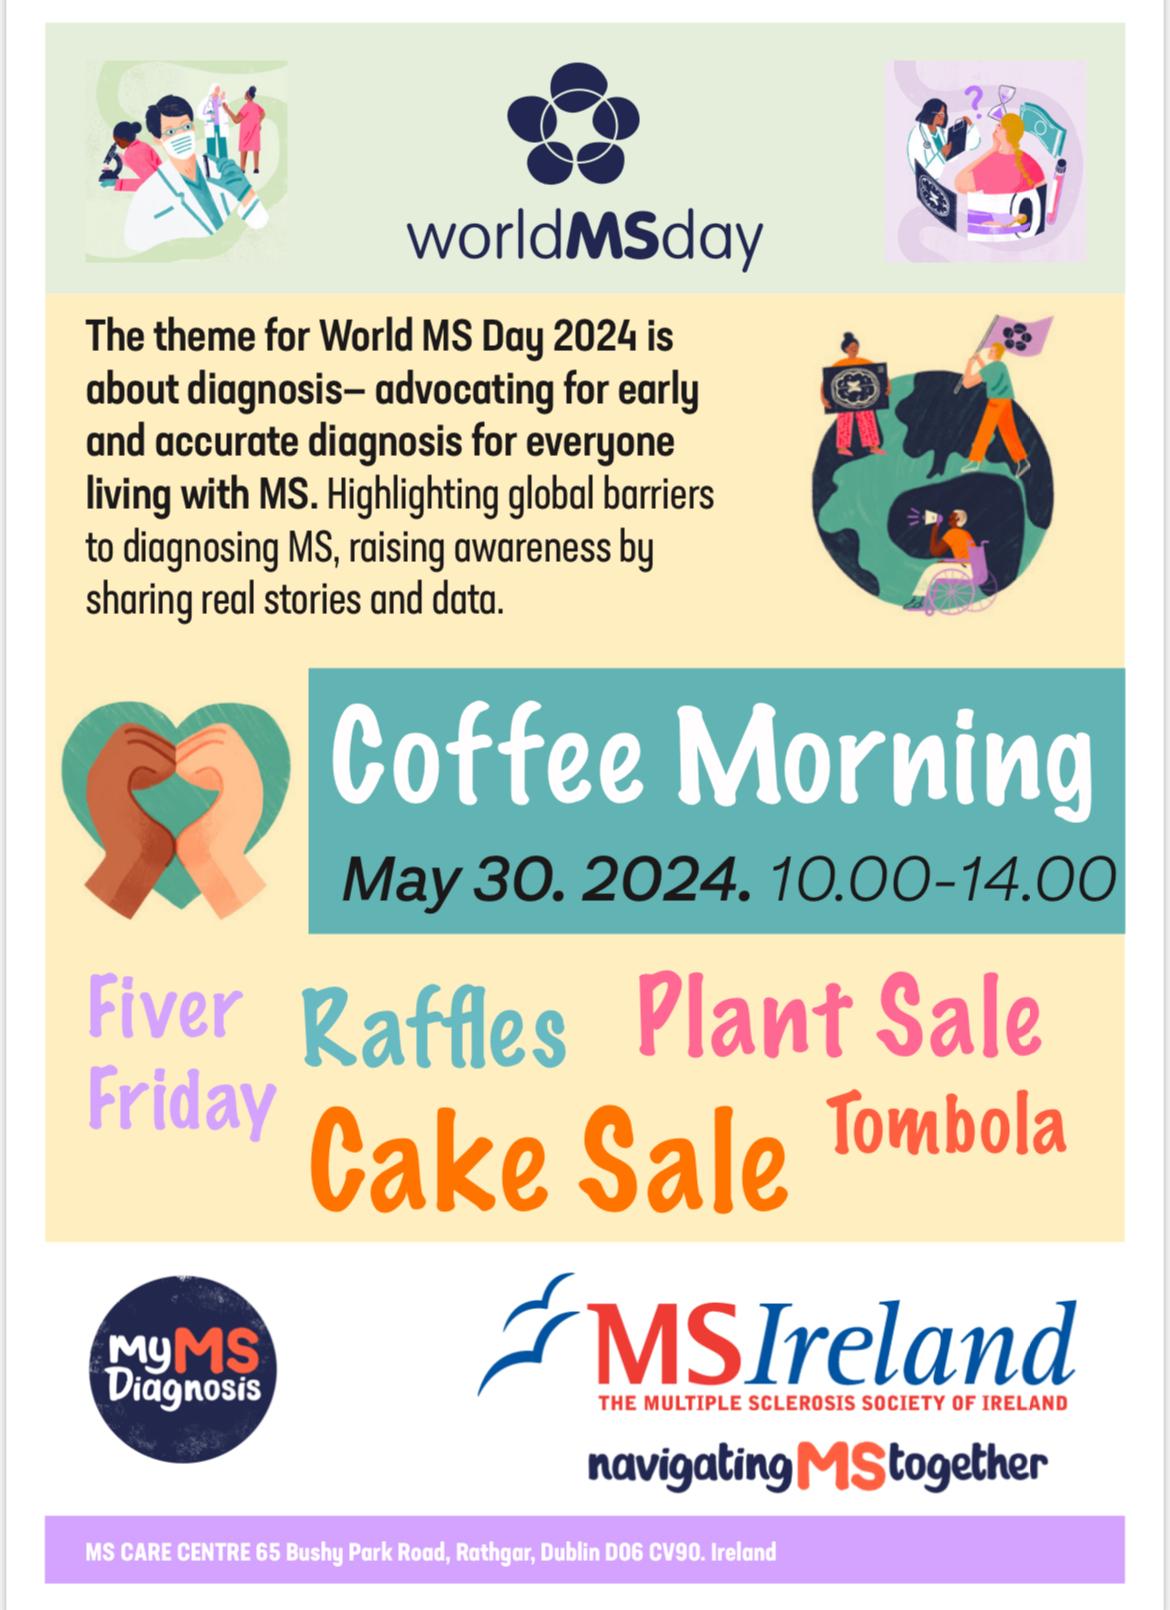 Poster for World MS Day 2024 Coffee Morning on May 30, highlighting early MS diagnosis with raffles, plant and cake sales, from 10:00-14:00 at MS Care Centre, Dublin.